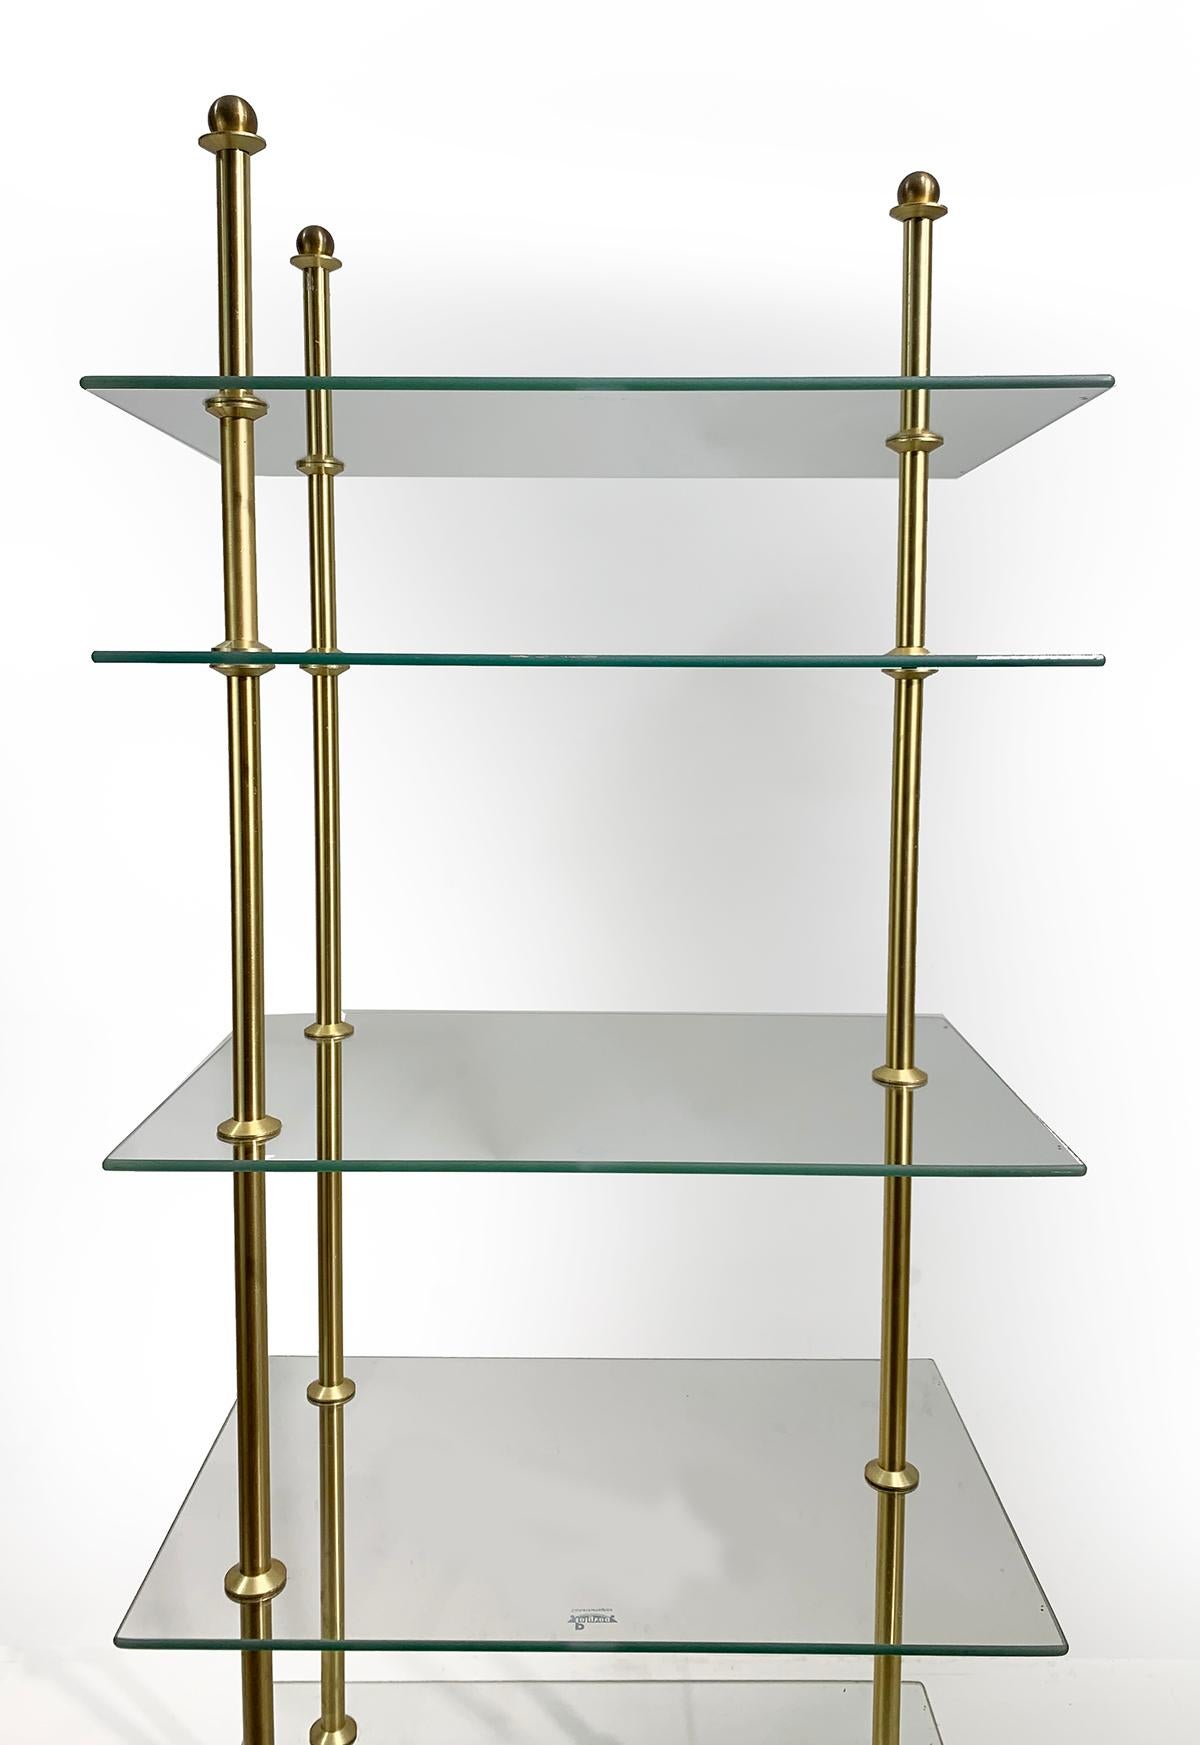 Elegant 20th century Art Deco five Glass Display shelves made in Italy. Every glass shelf has a signature.